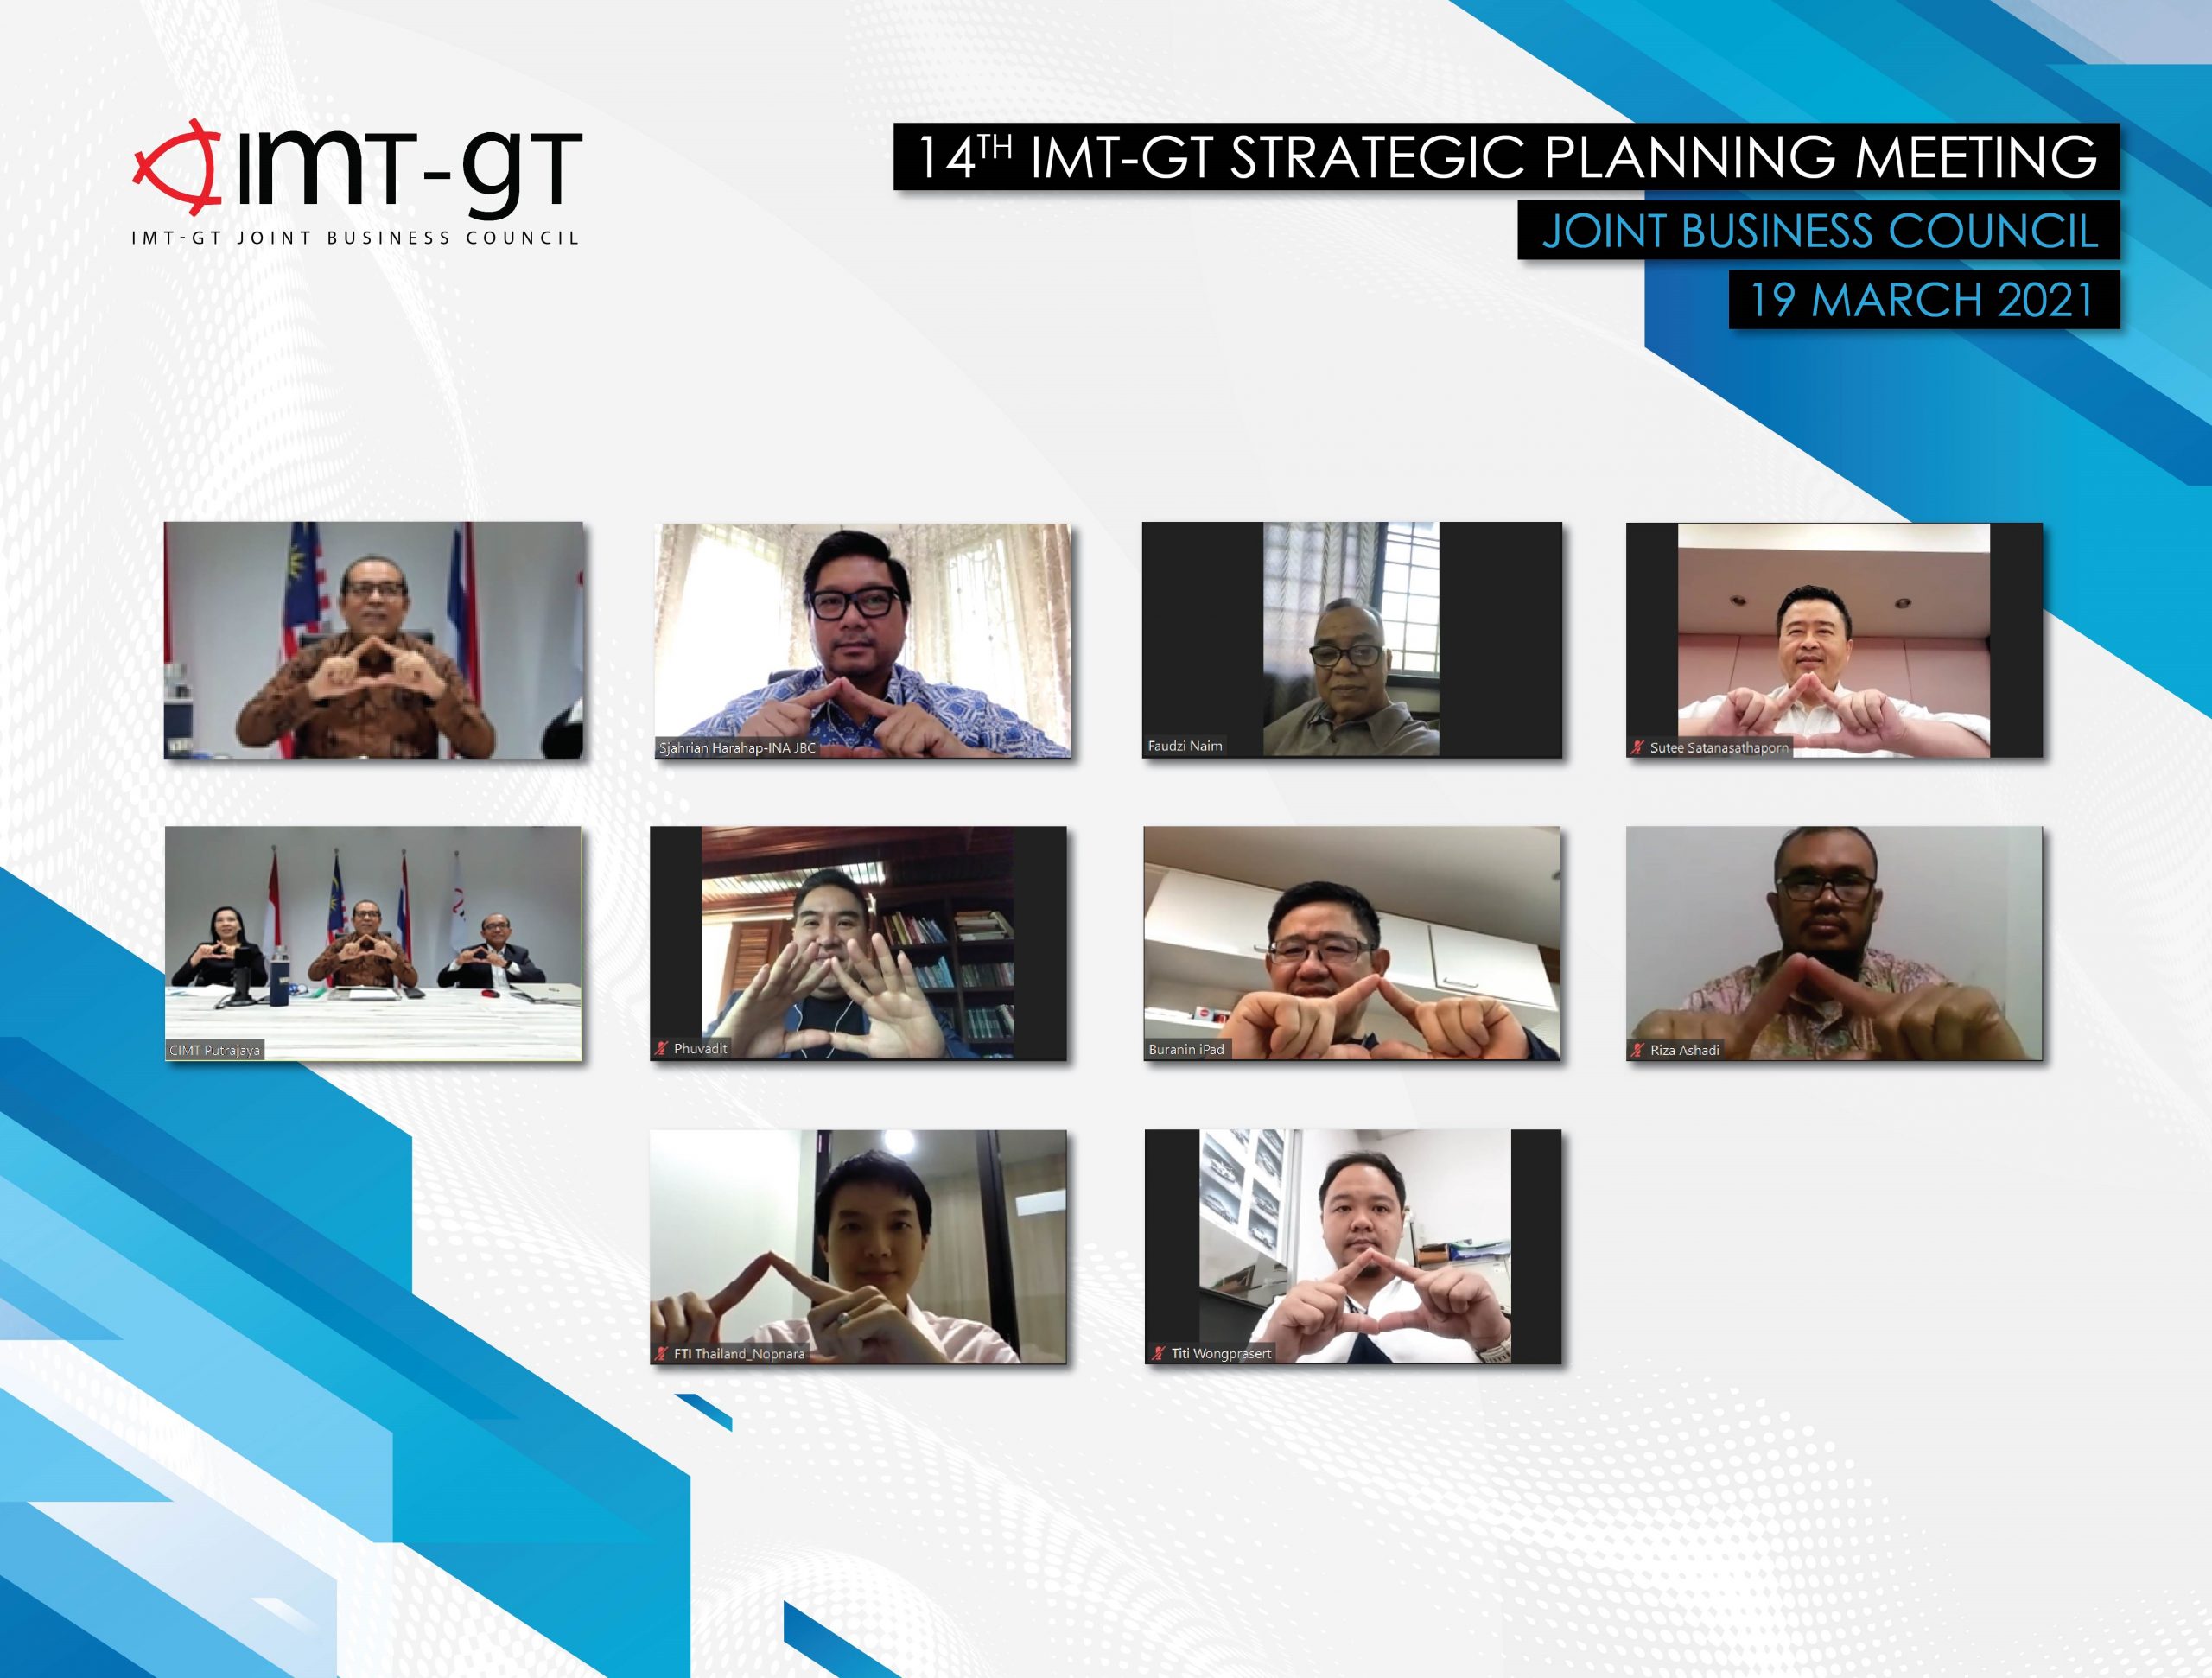 14TH IMT-GT STRATEGIC PLANNING MEETING – BREAKOUT SESSION – JOINT BUSINESS COUNCIL